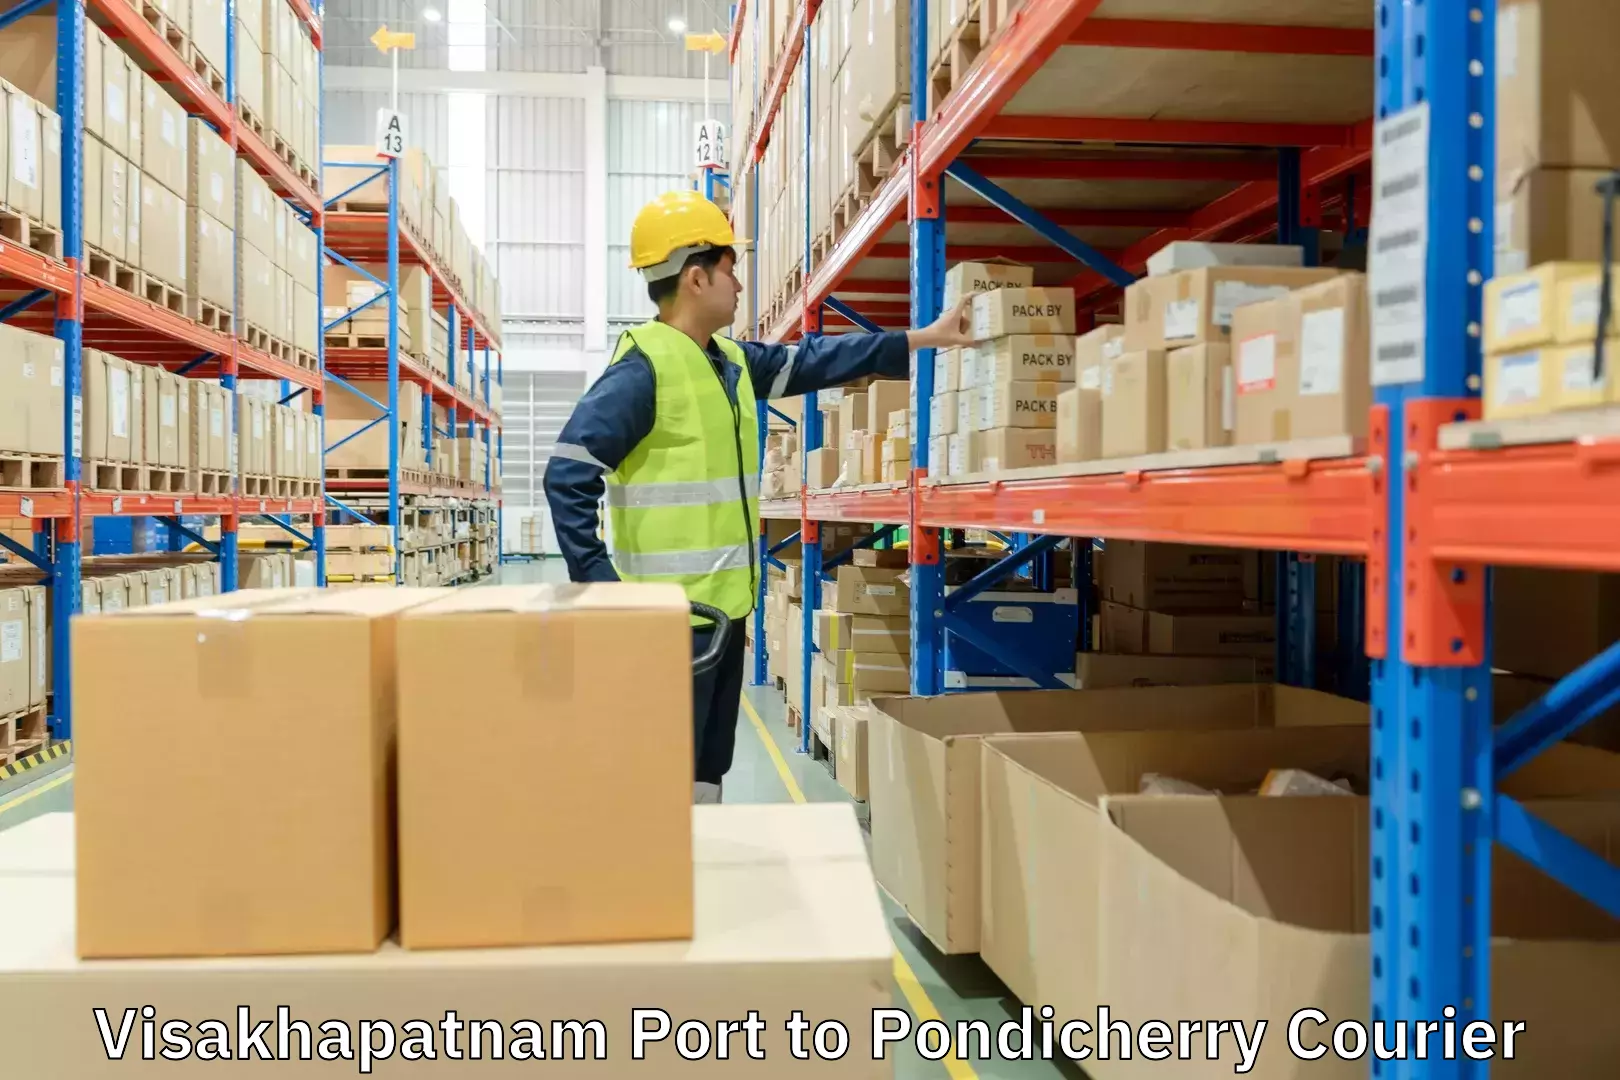 Express package delivery in Visakhapatnam Port to Pondicherry